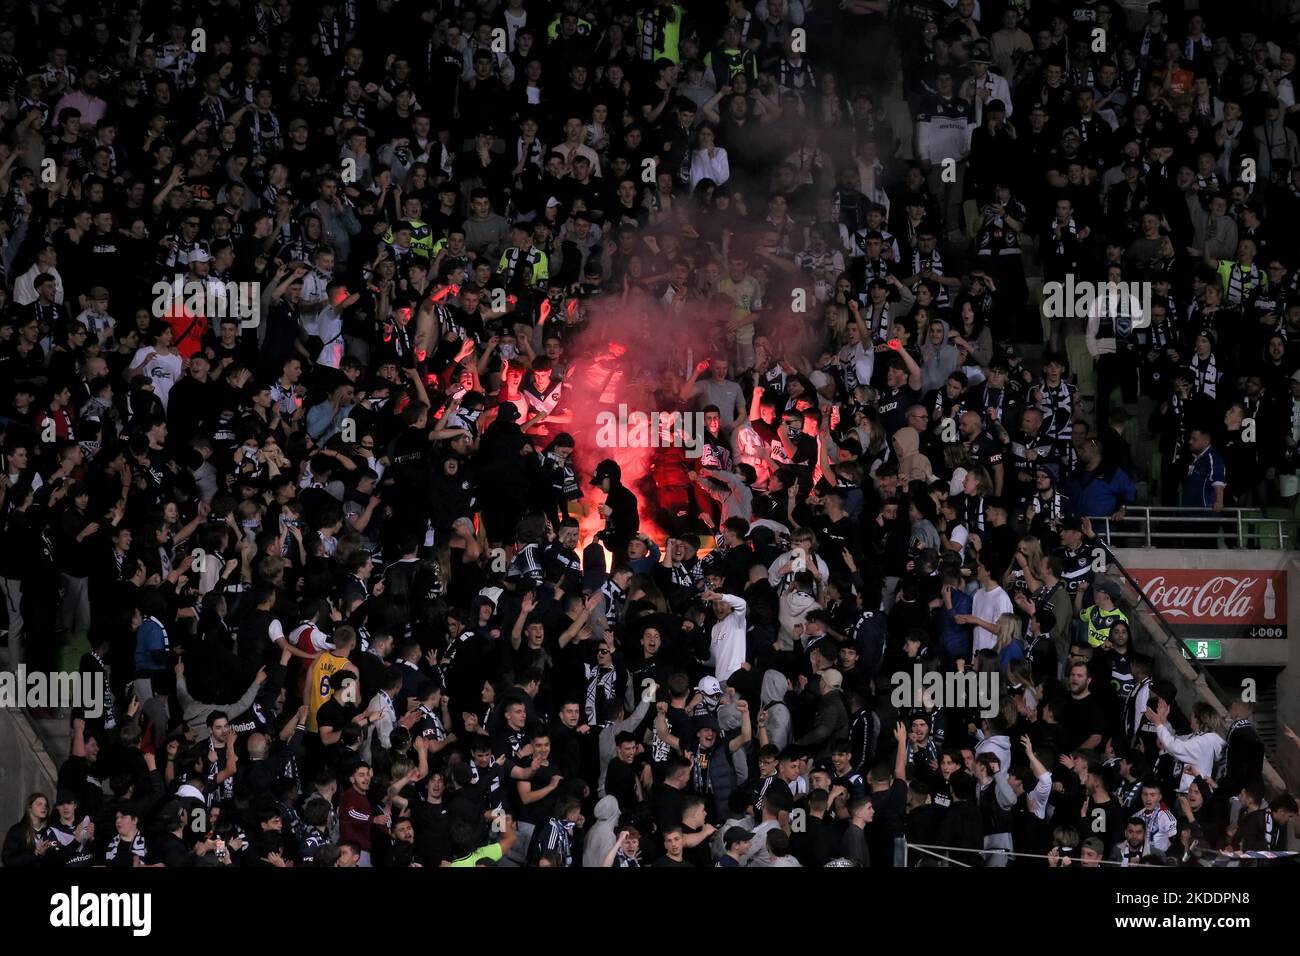 Melbourne, Australia, 4 November, 2022. Melbourne Victory fans lose control of fireworks and start a fire in the stand during the A-League Men's football match between Melbourne Victory and Newcastle Jets at AAMI Park on November 04, 2022 in Melbourne, Australia. Credit: Dave Hewison/Speed Media/Alamy Live News Stock Photo